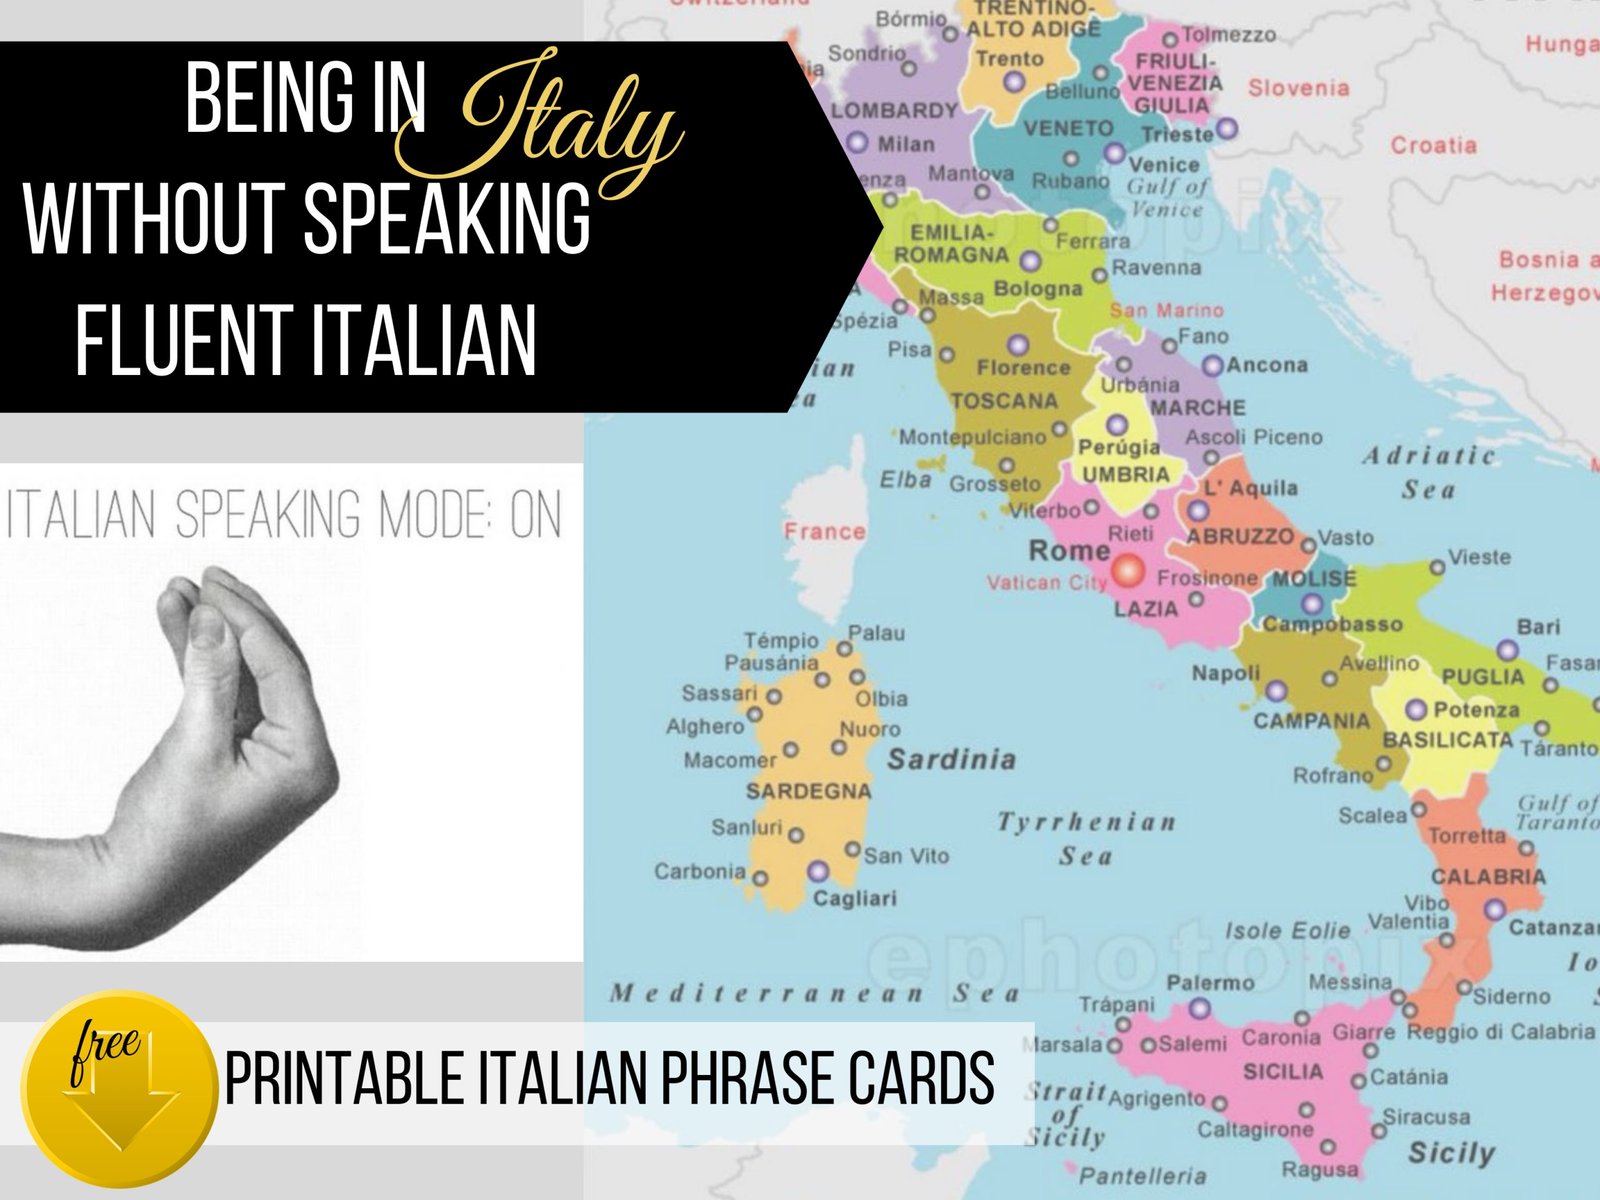 In Italy not speaking fluent Italian. Free download printable Italian Phrase Cards from ouritalianjourney.com https://ouritalianjourney.com/being-in-italy-without-speaking-fluent-italian